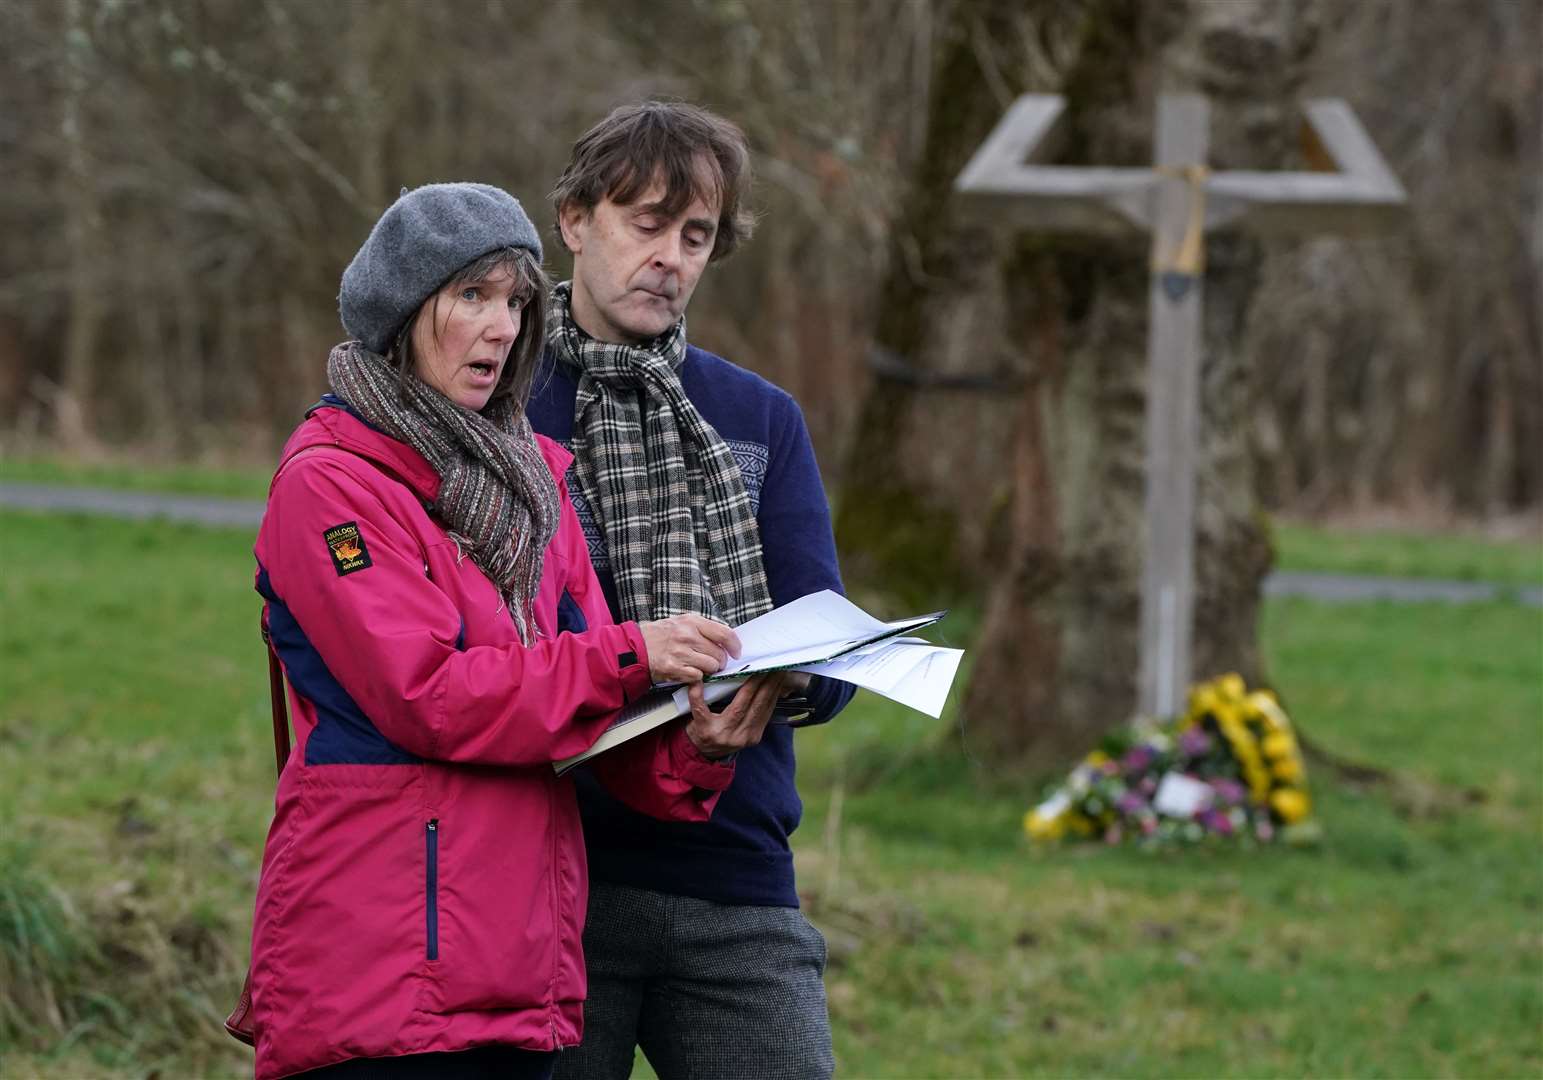 Scotland’s Makar Kathleen Jamie and memorial creator Alec Finlay read together after the silence (Andrew Milligan/PA)